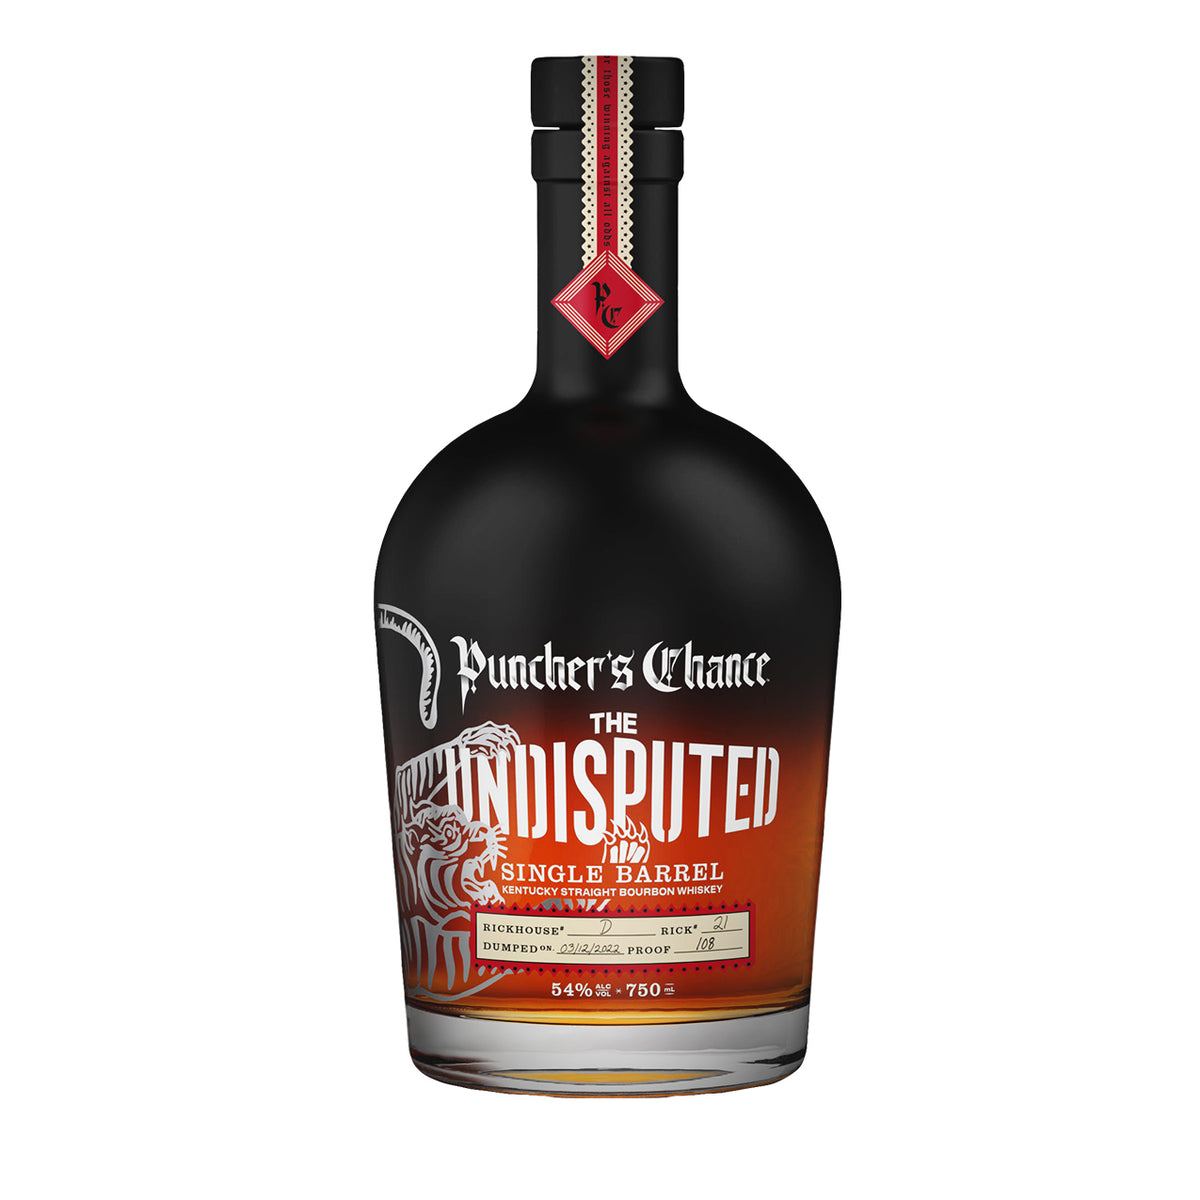 Puncher’s Chance Bourbon: The UNDISPUTED